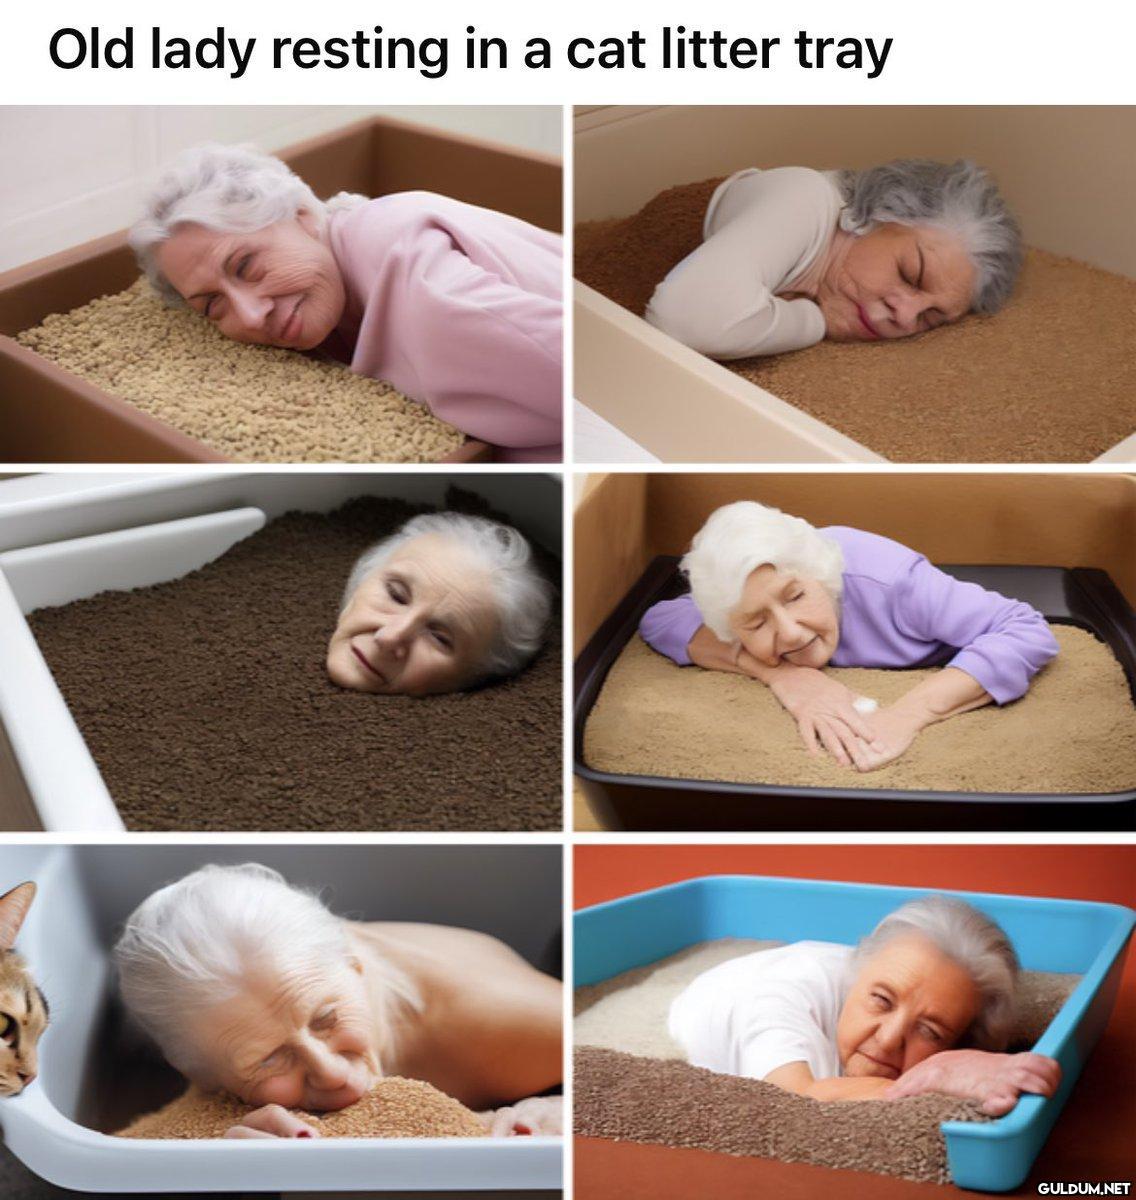 Old lady resting in a cat...